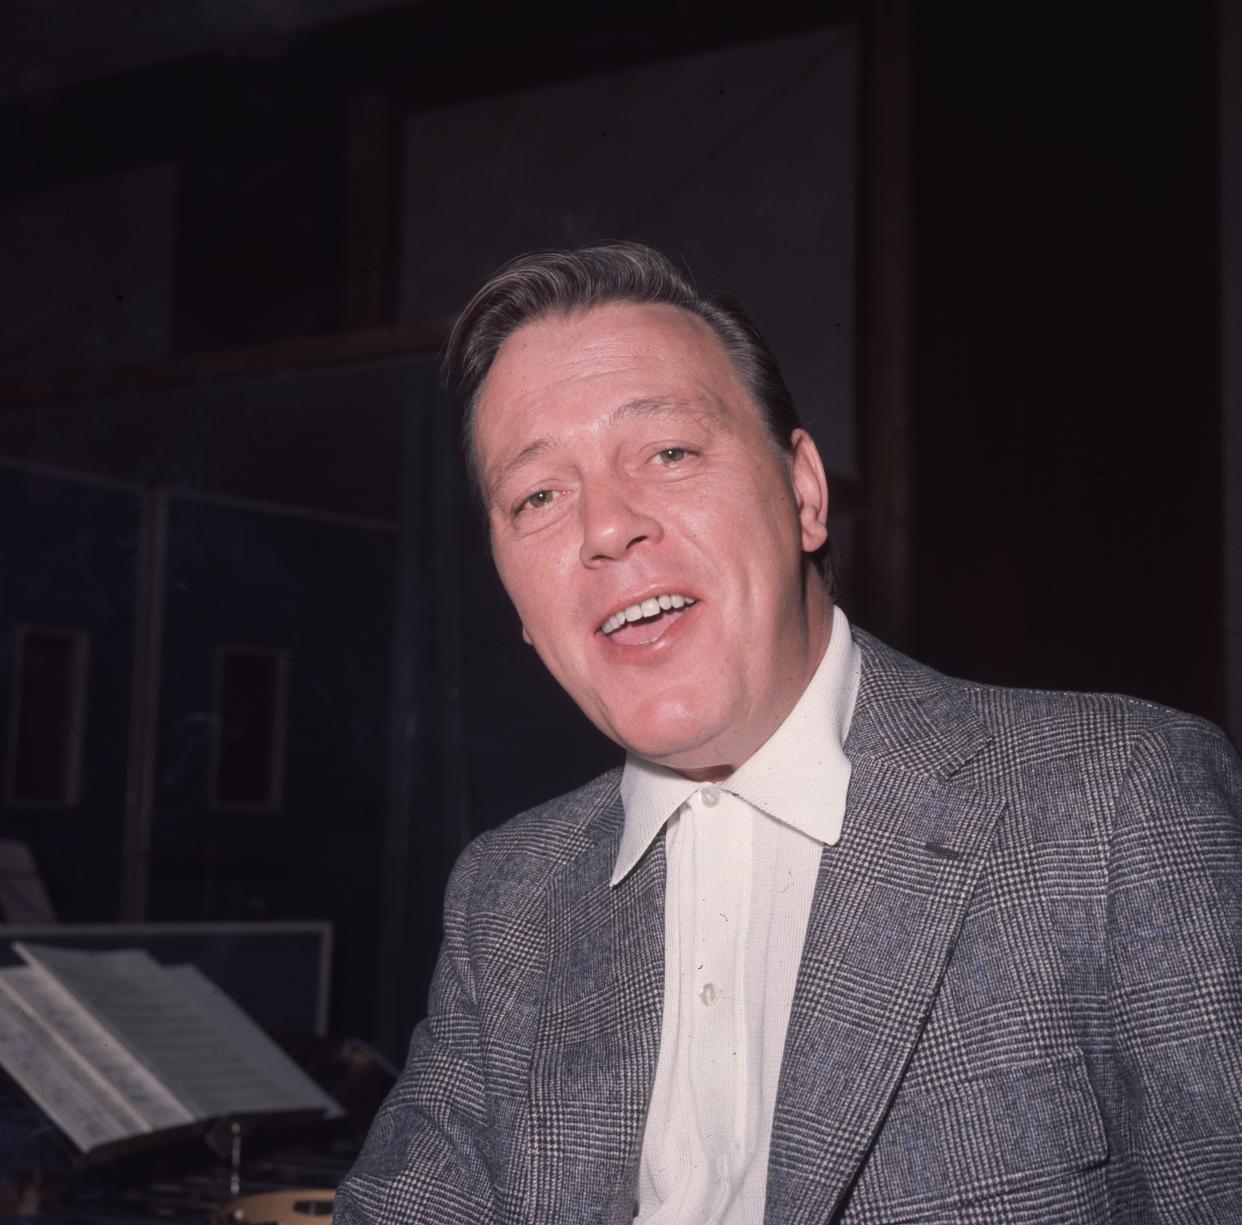 circa 1965:  English singer Matt Monro (1932 - 1985), best known for his hearty rendition of the theme tune for the James Bond film 'From Russia with Love'.  (Photo by Keystone/Getty Images)